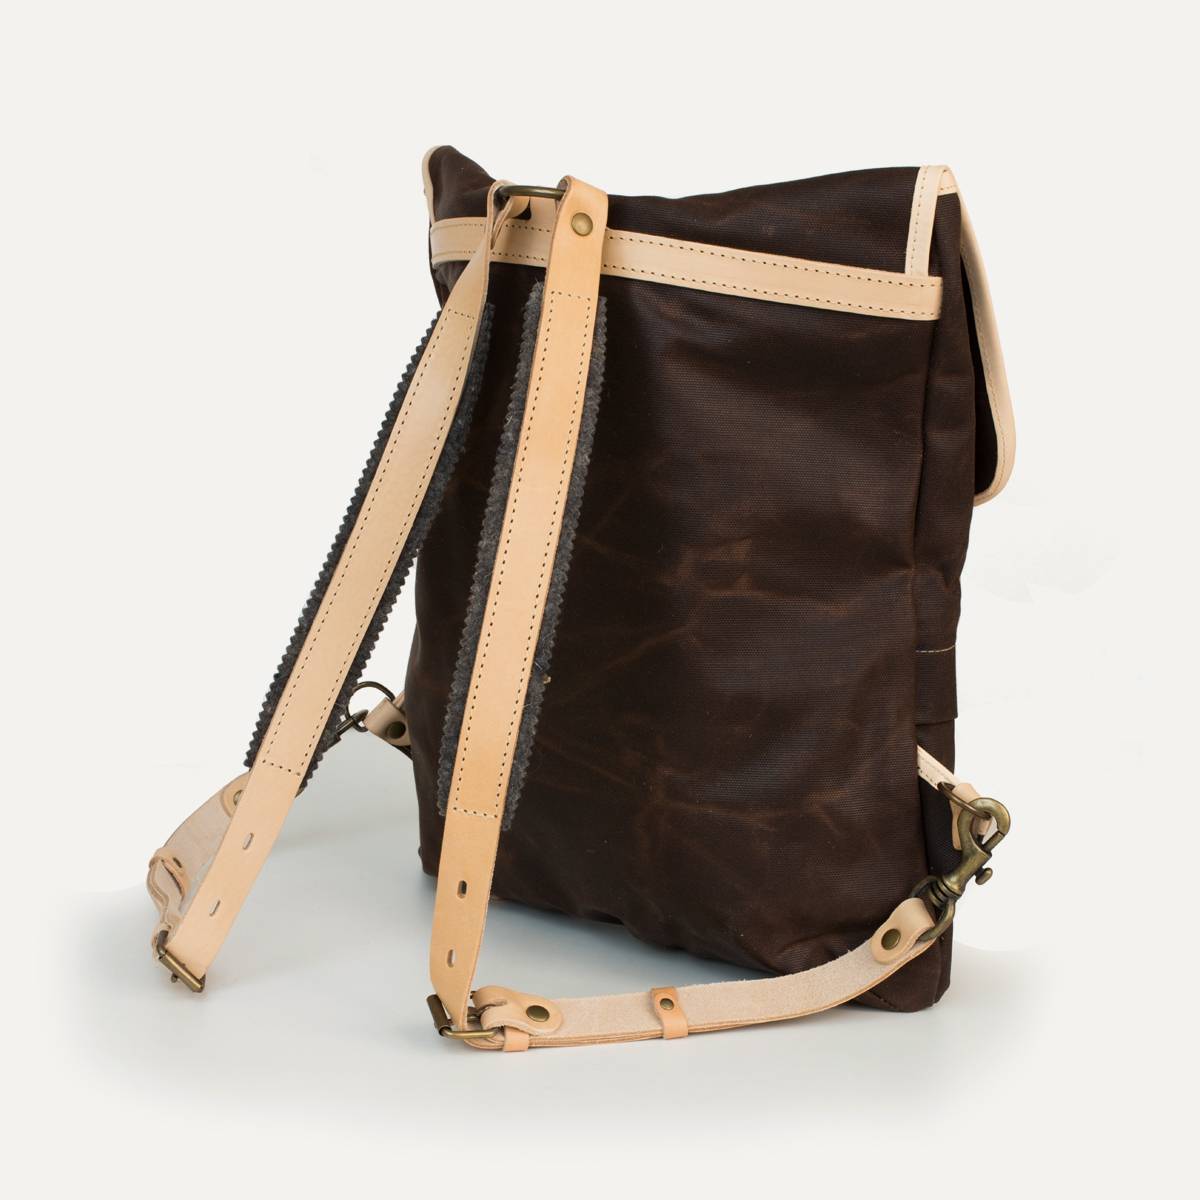 Coursier backpack WAXY - Brown/Natural (image n°2)